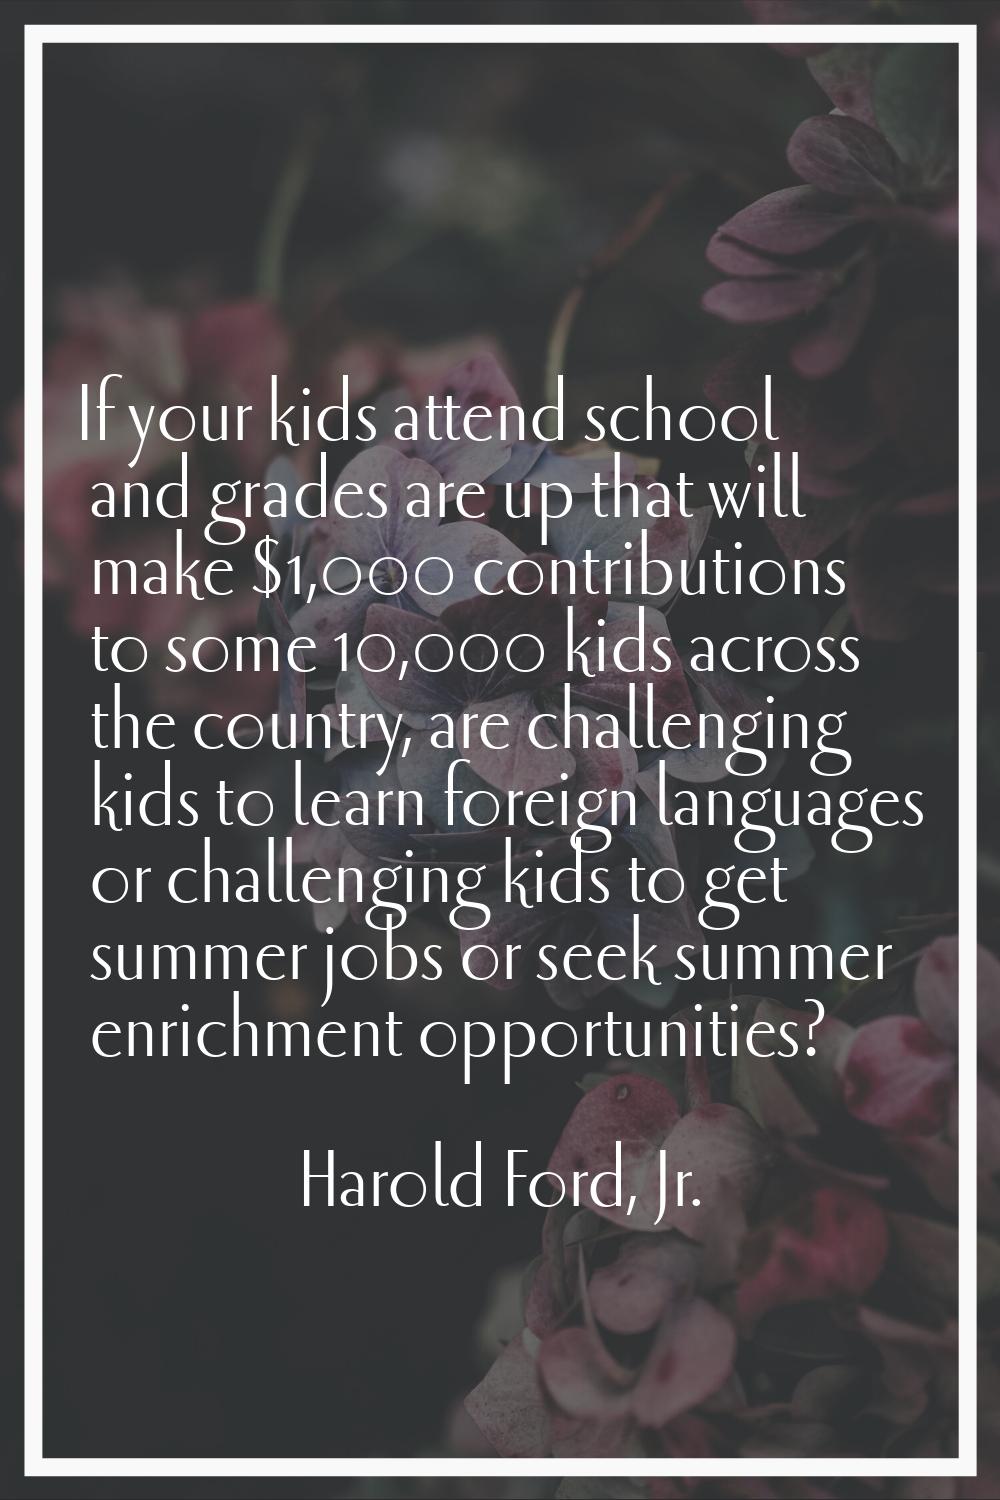 If your kids attend school and grades are up that will make $1,000 contributions to some 10,000 kid